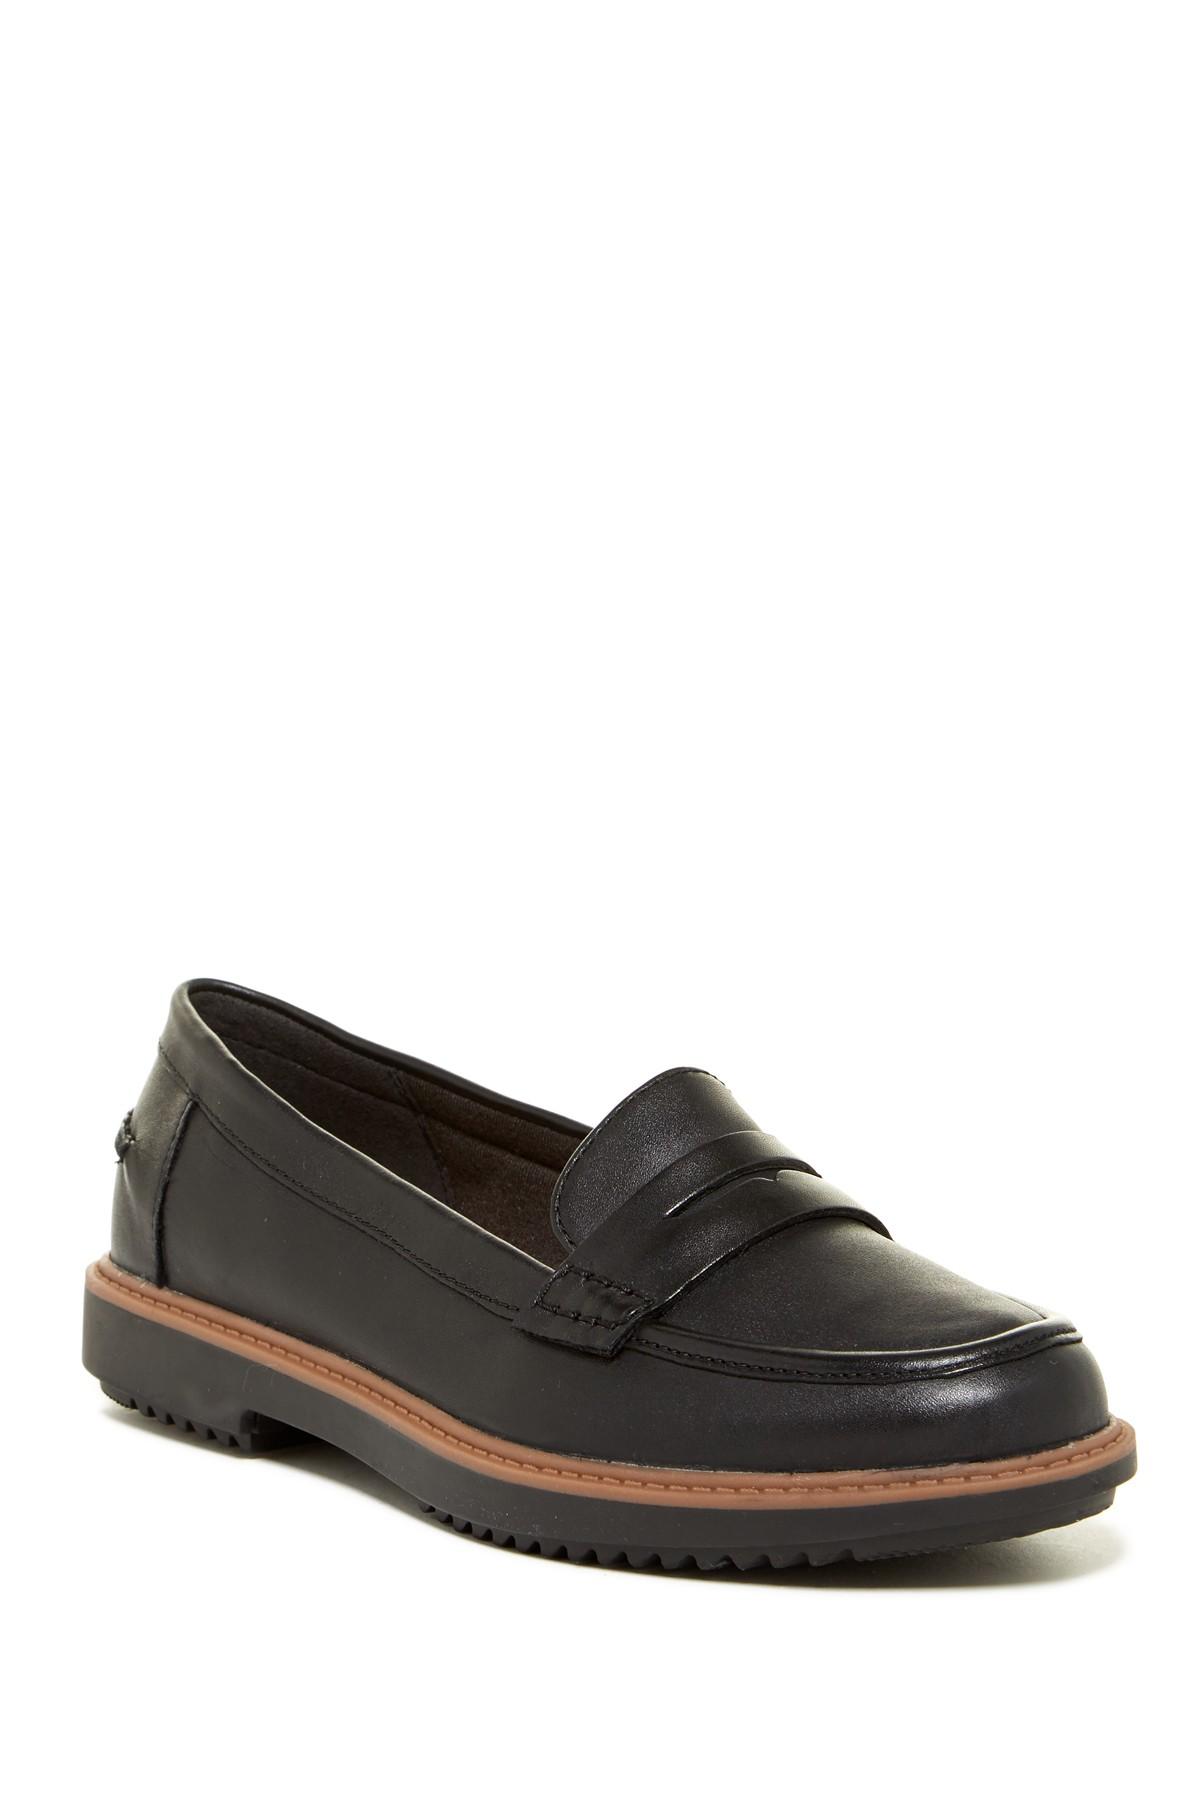 Clarks Leather Raisie Eletta Loafer - Wide Width Available in Black - Lyst